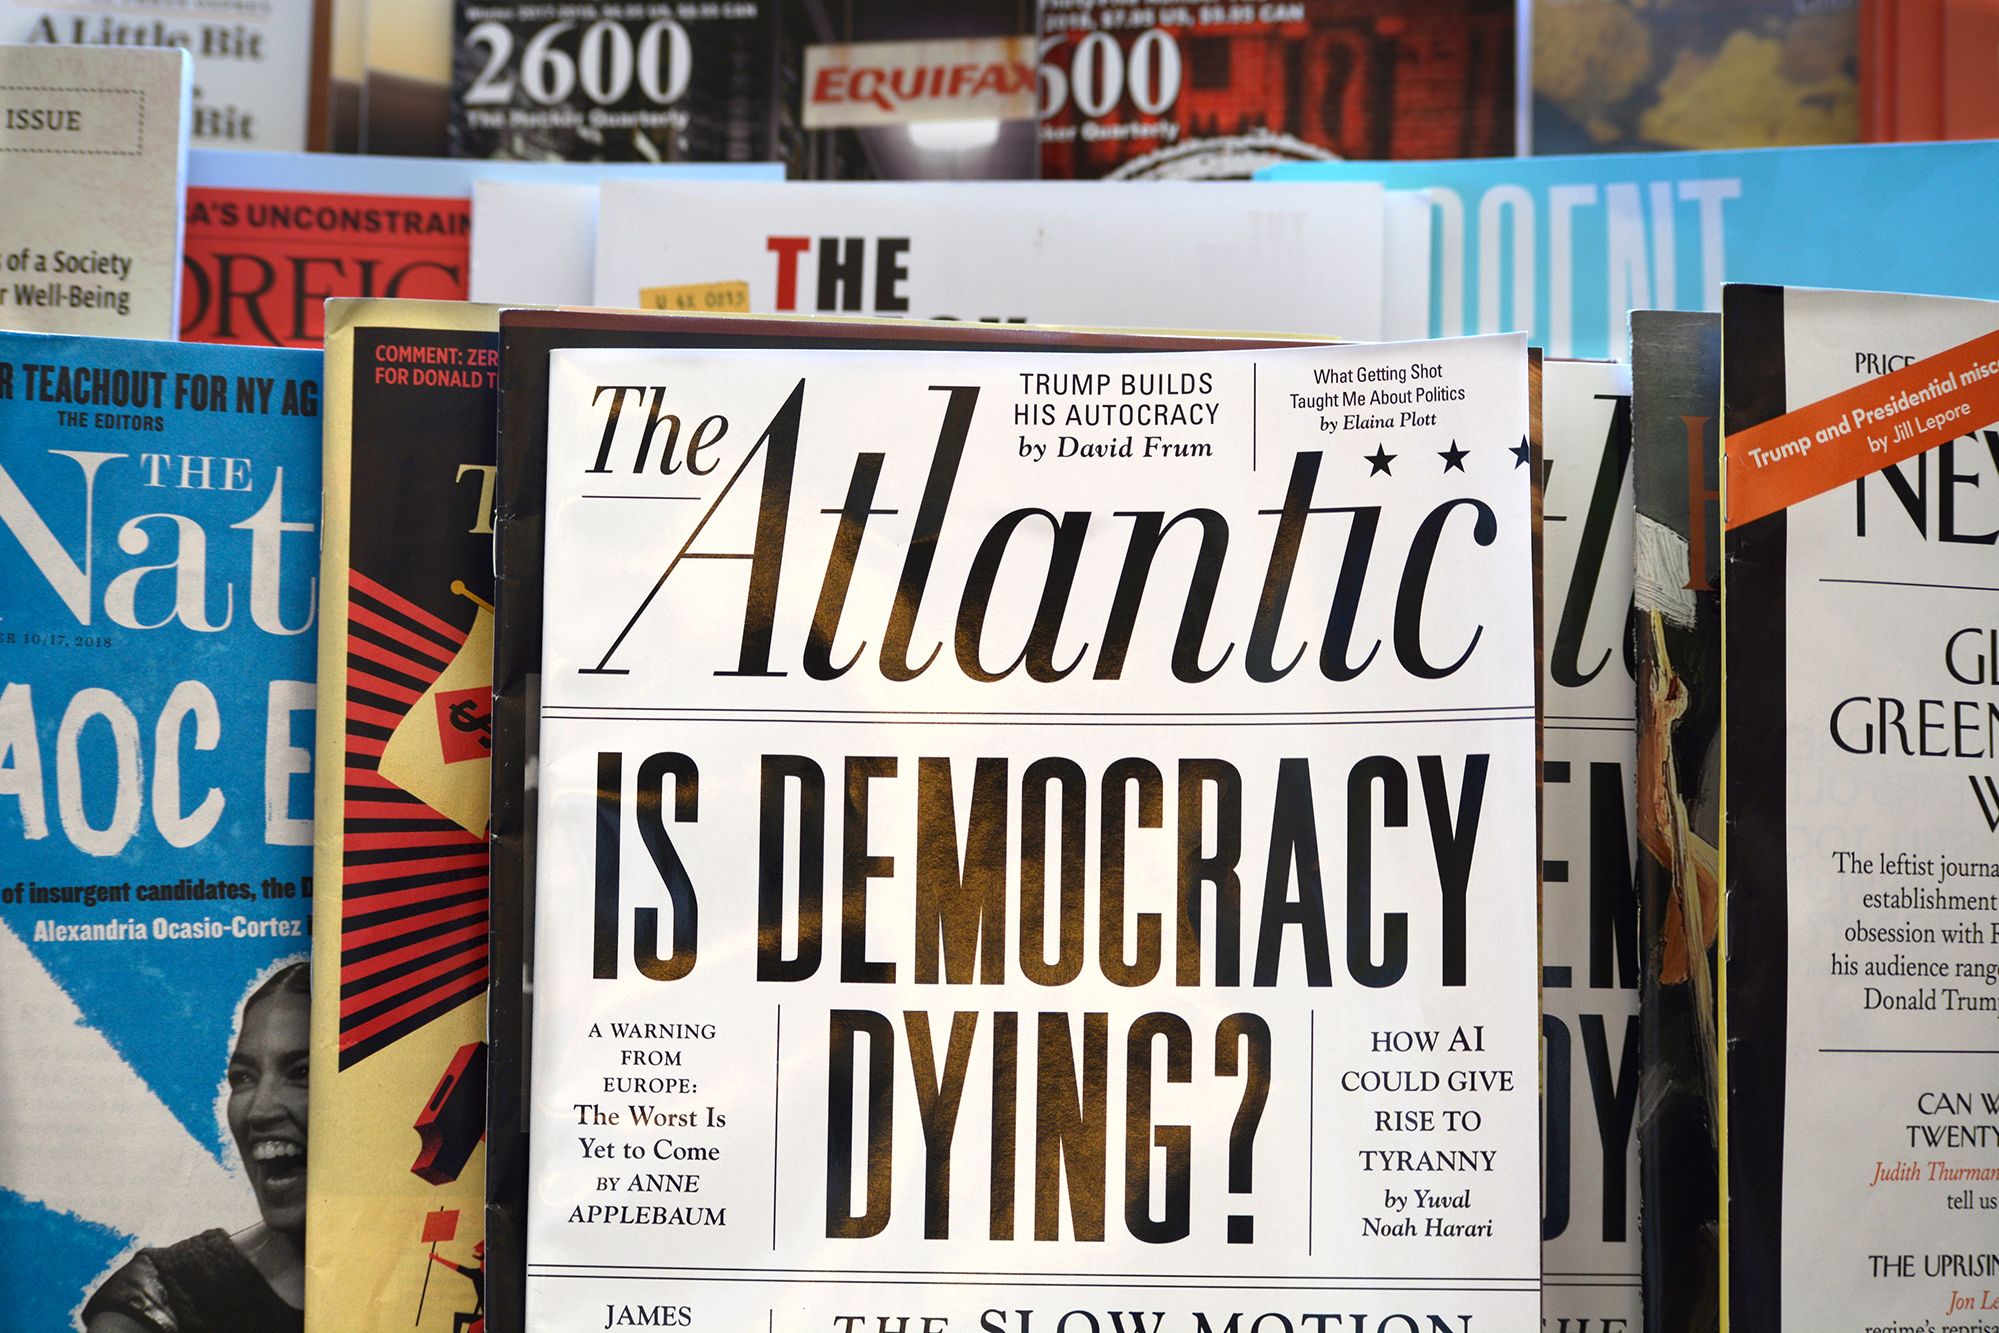 The Atlantic gained 20,000 subscribers after Trump dismissed it as a 'dying' magazine | CNN Business